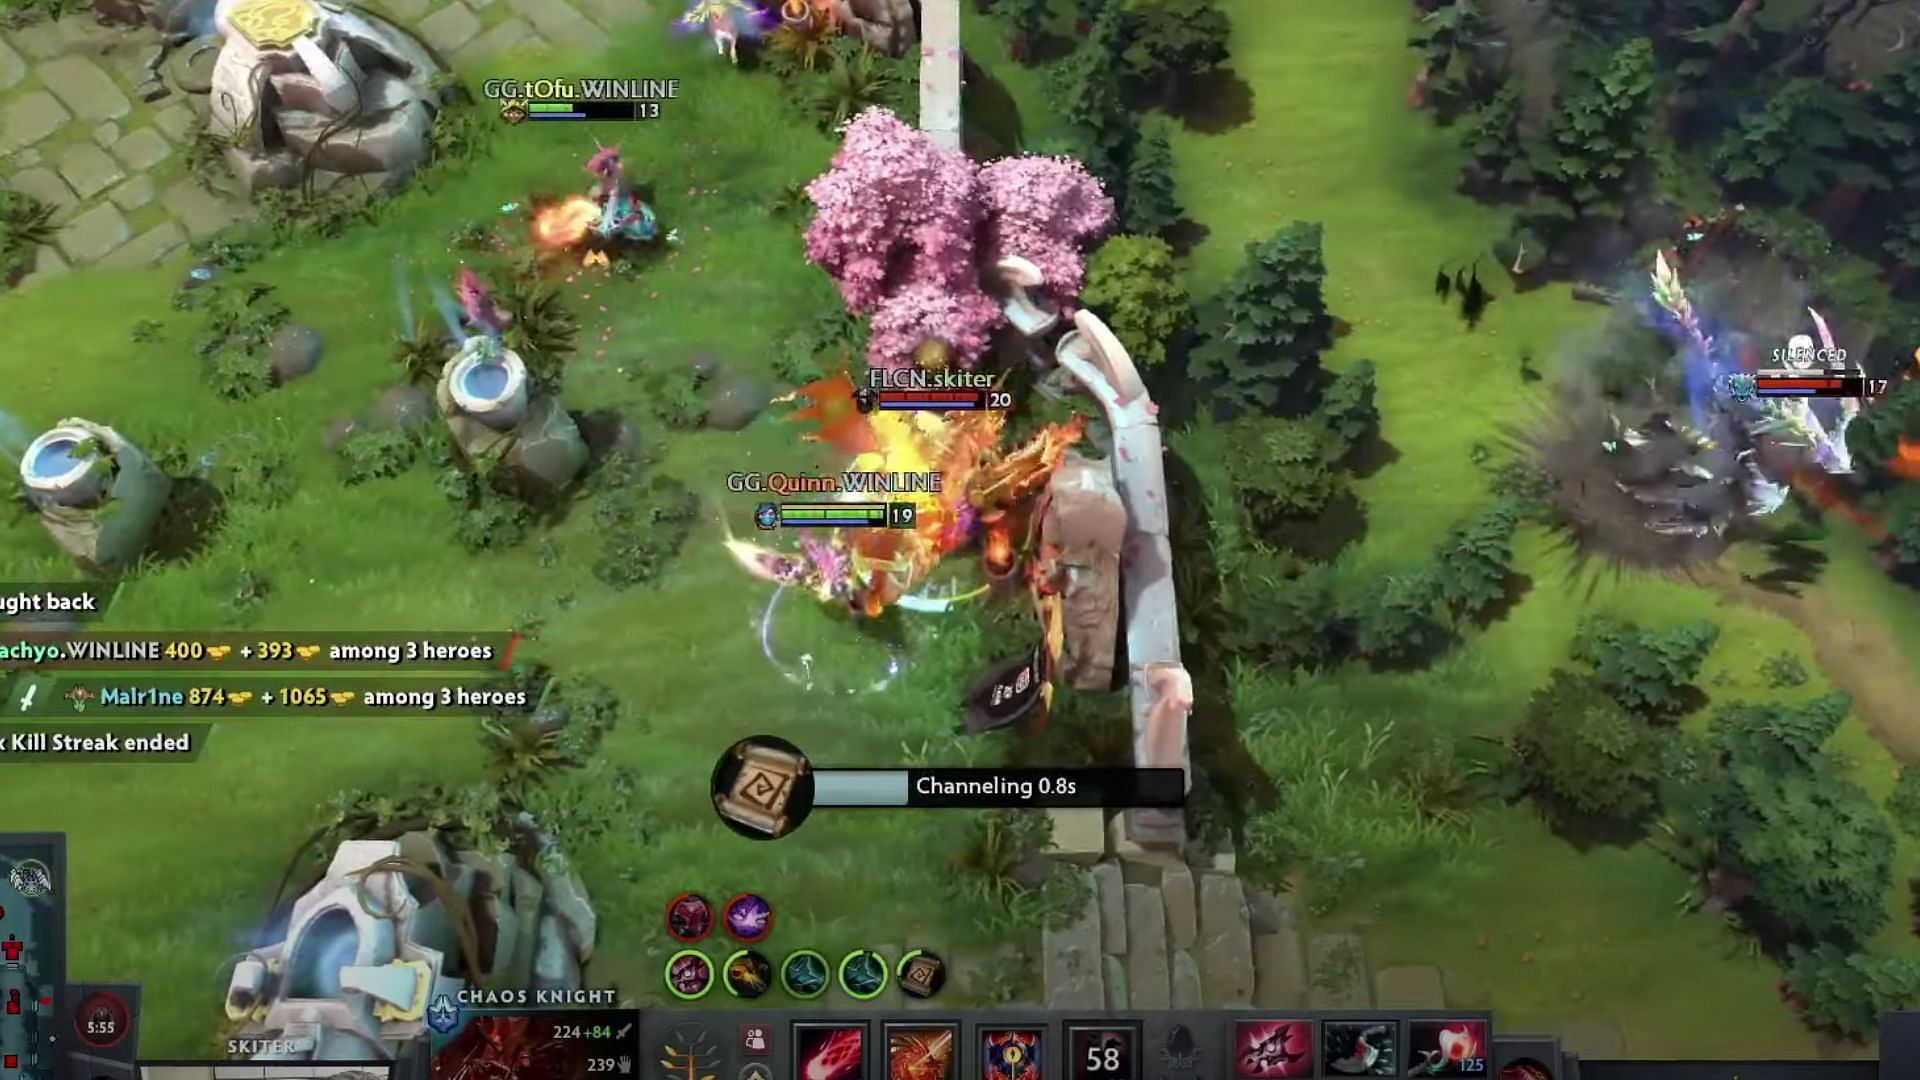 Chaos Knight survives a teamwipe and tps to safety (Image via ESL One Dota 2/YT)